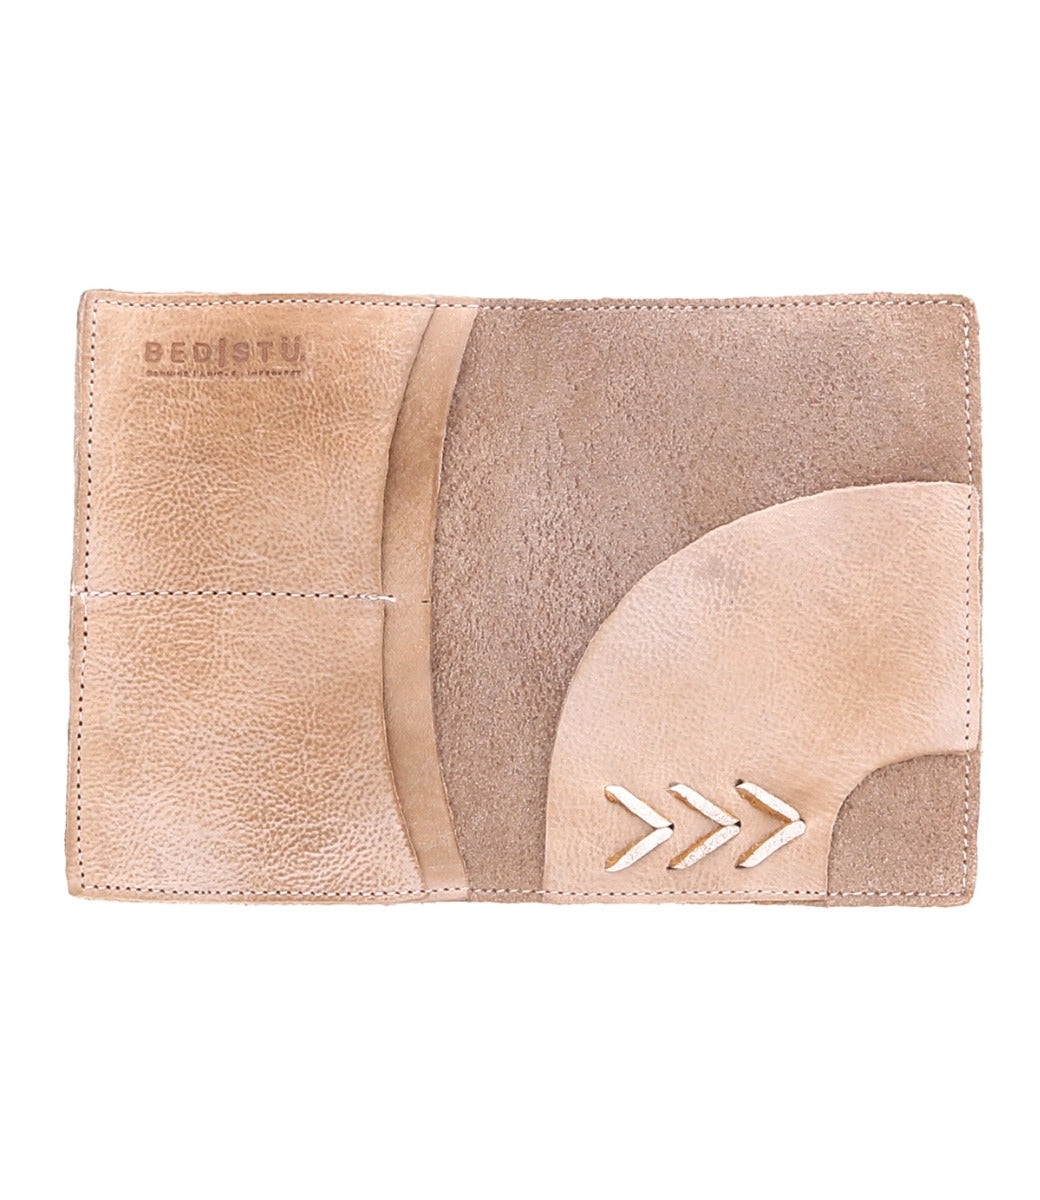 A brown leather Stardust passport holder with an arrow on it from Bed Stu.